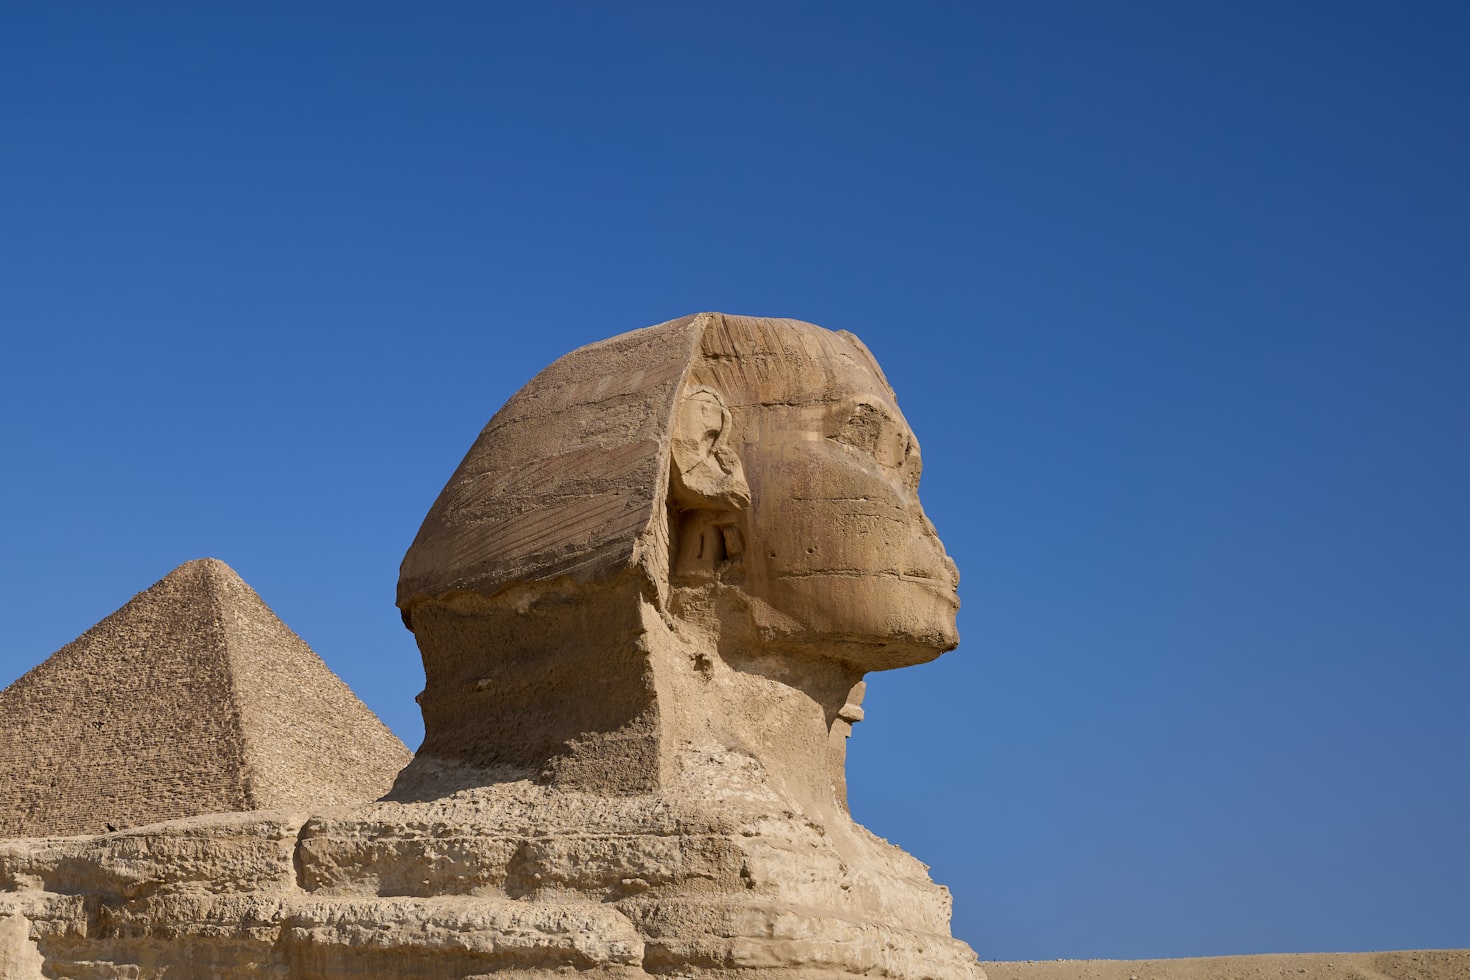 The Great Sphinx of Giza is not a lion